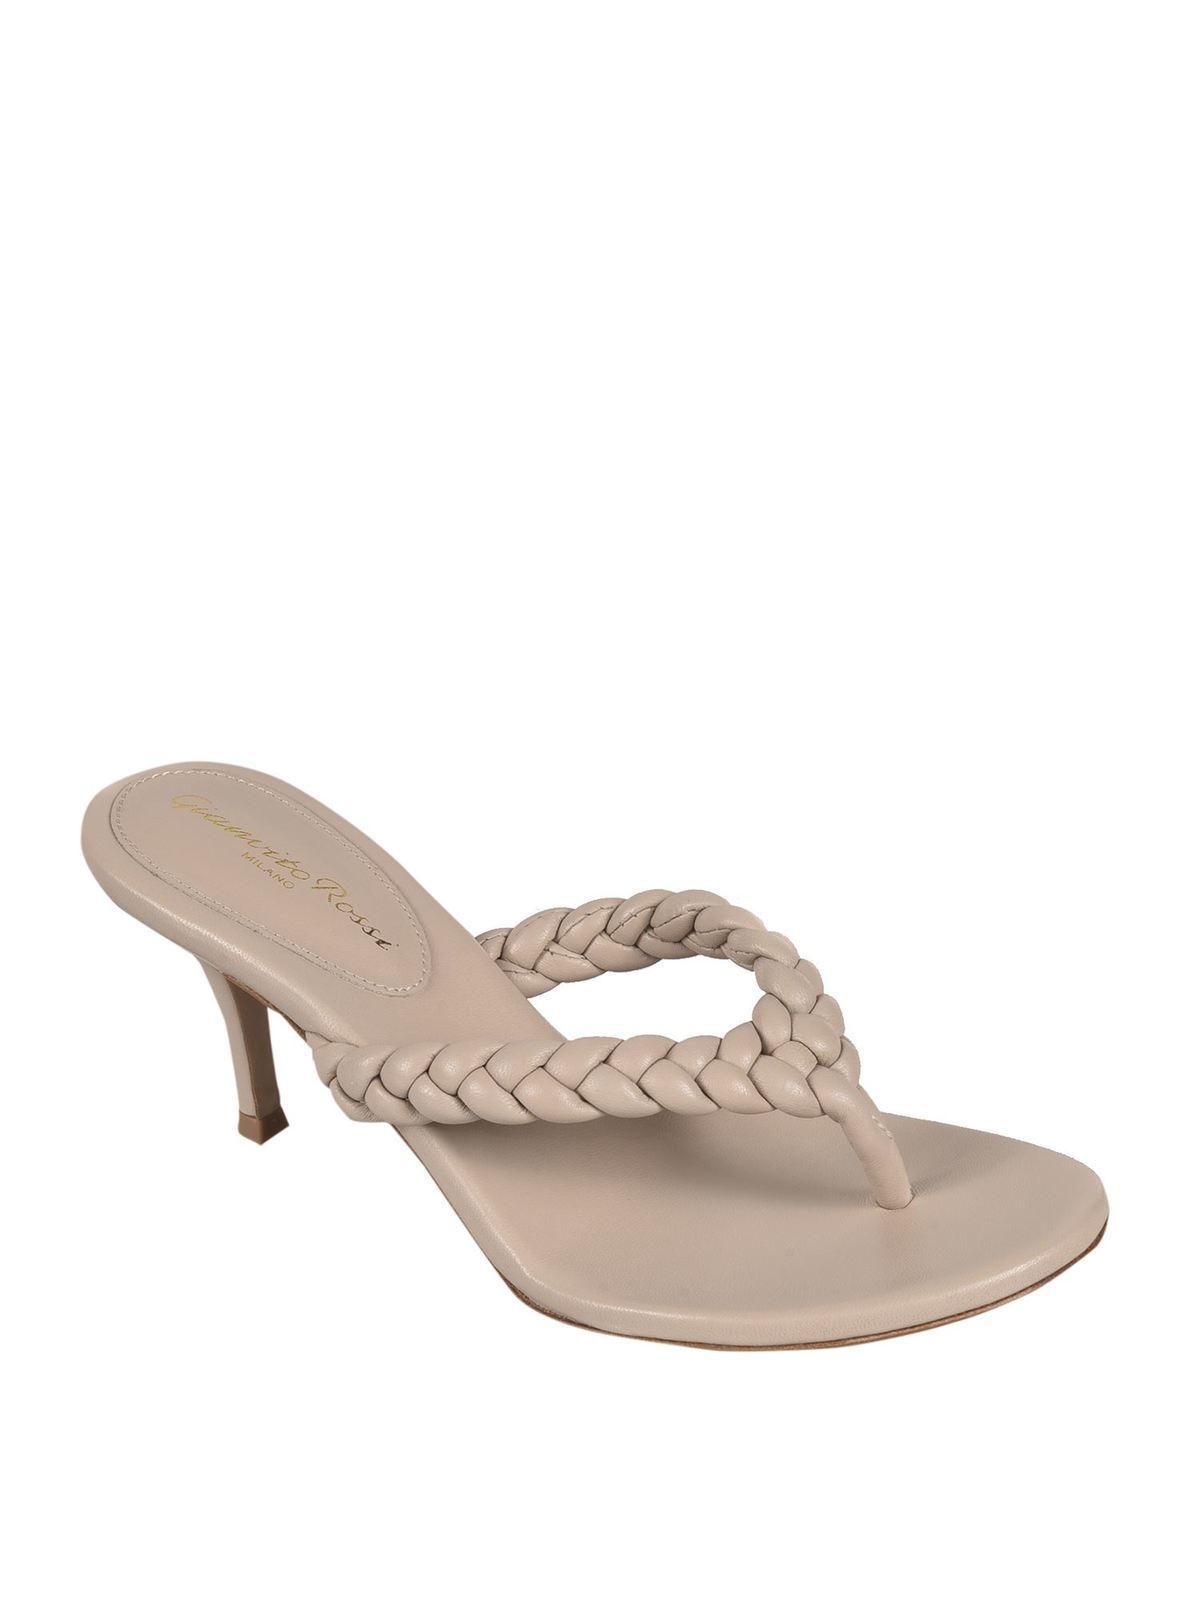 Sandals Gianvito Rossi - Tropea sandals in Mousse color 